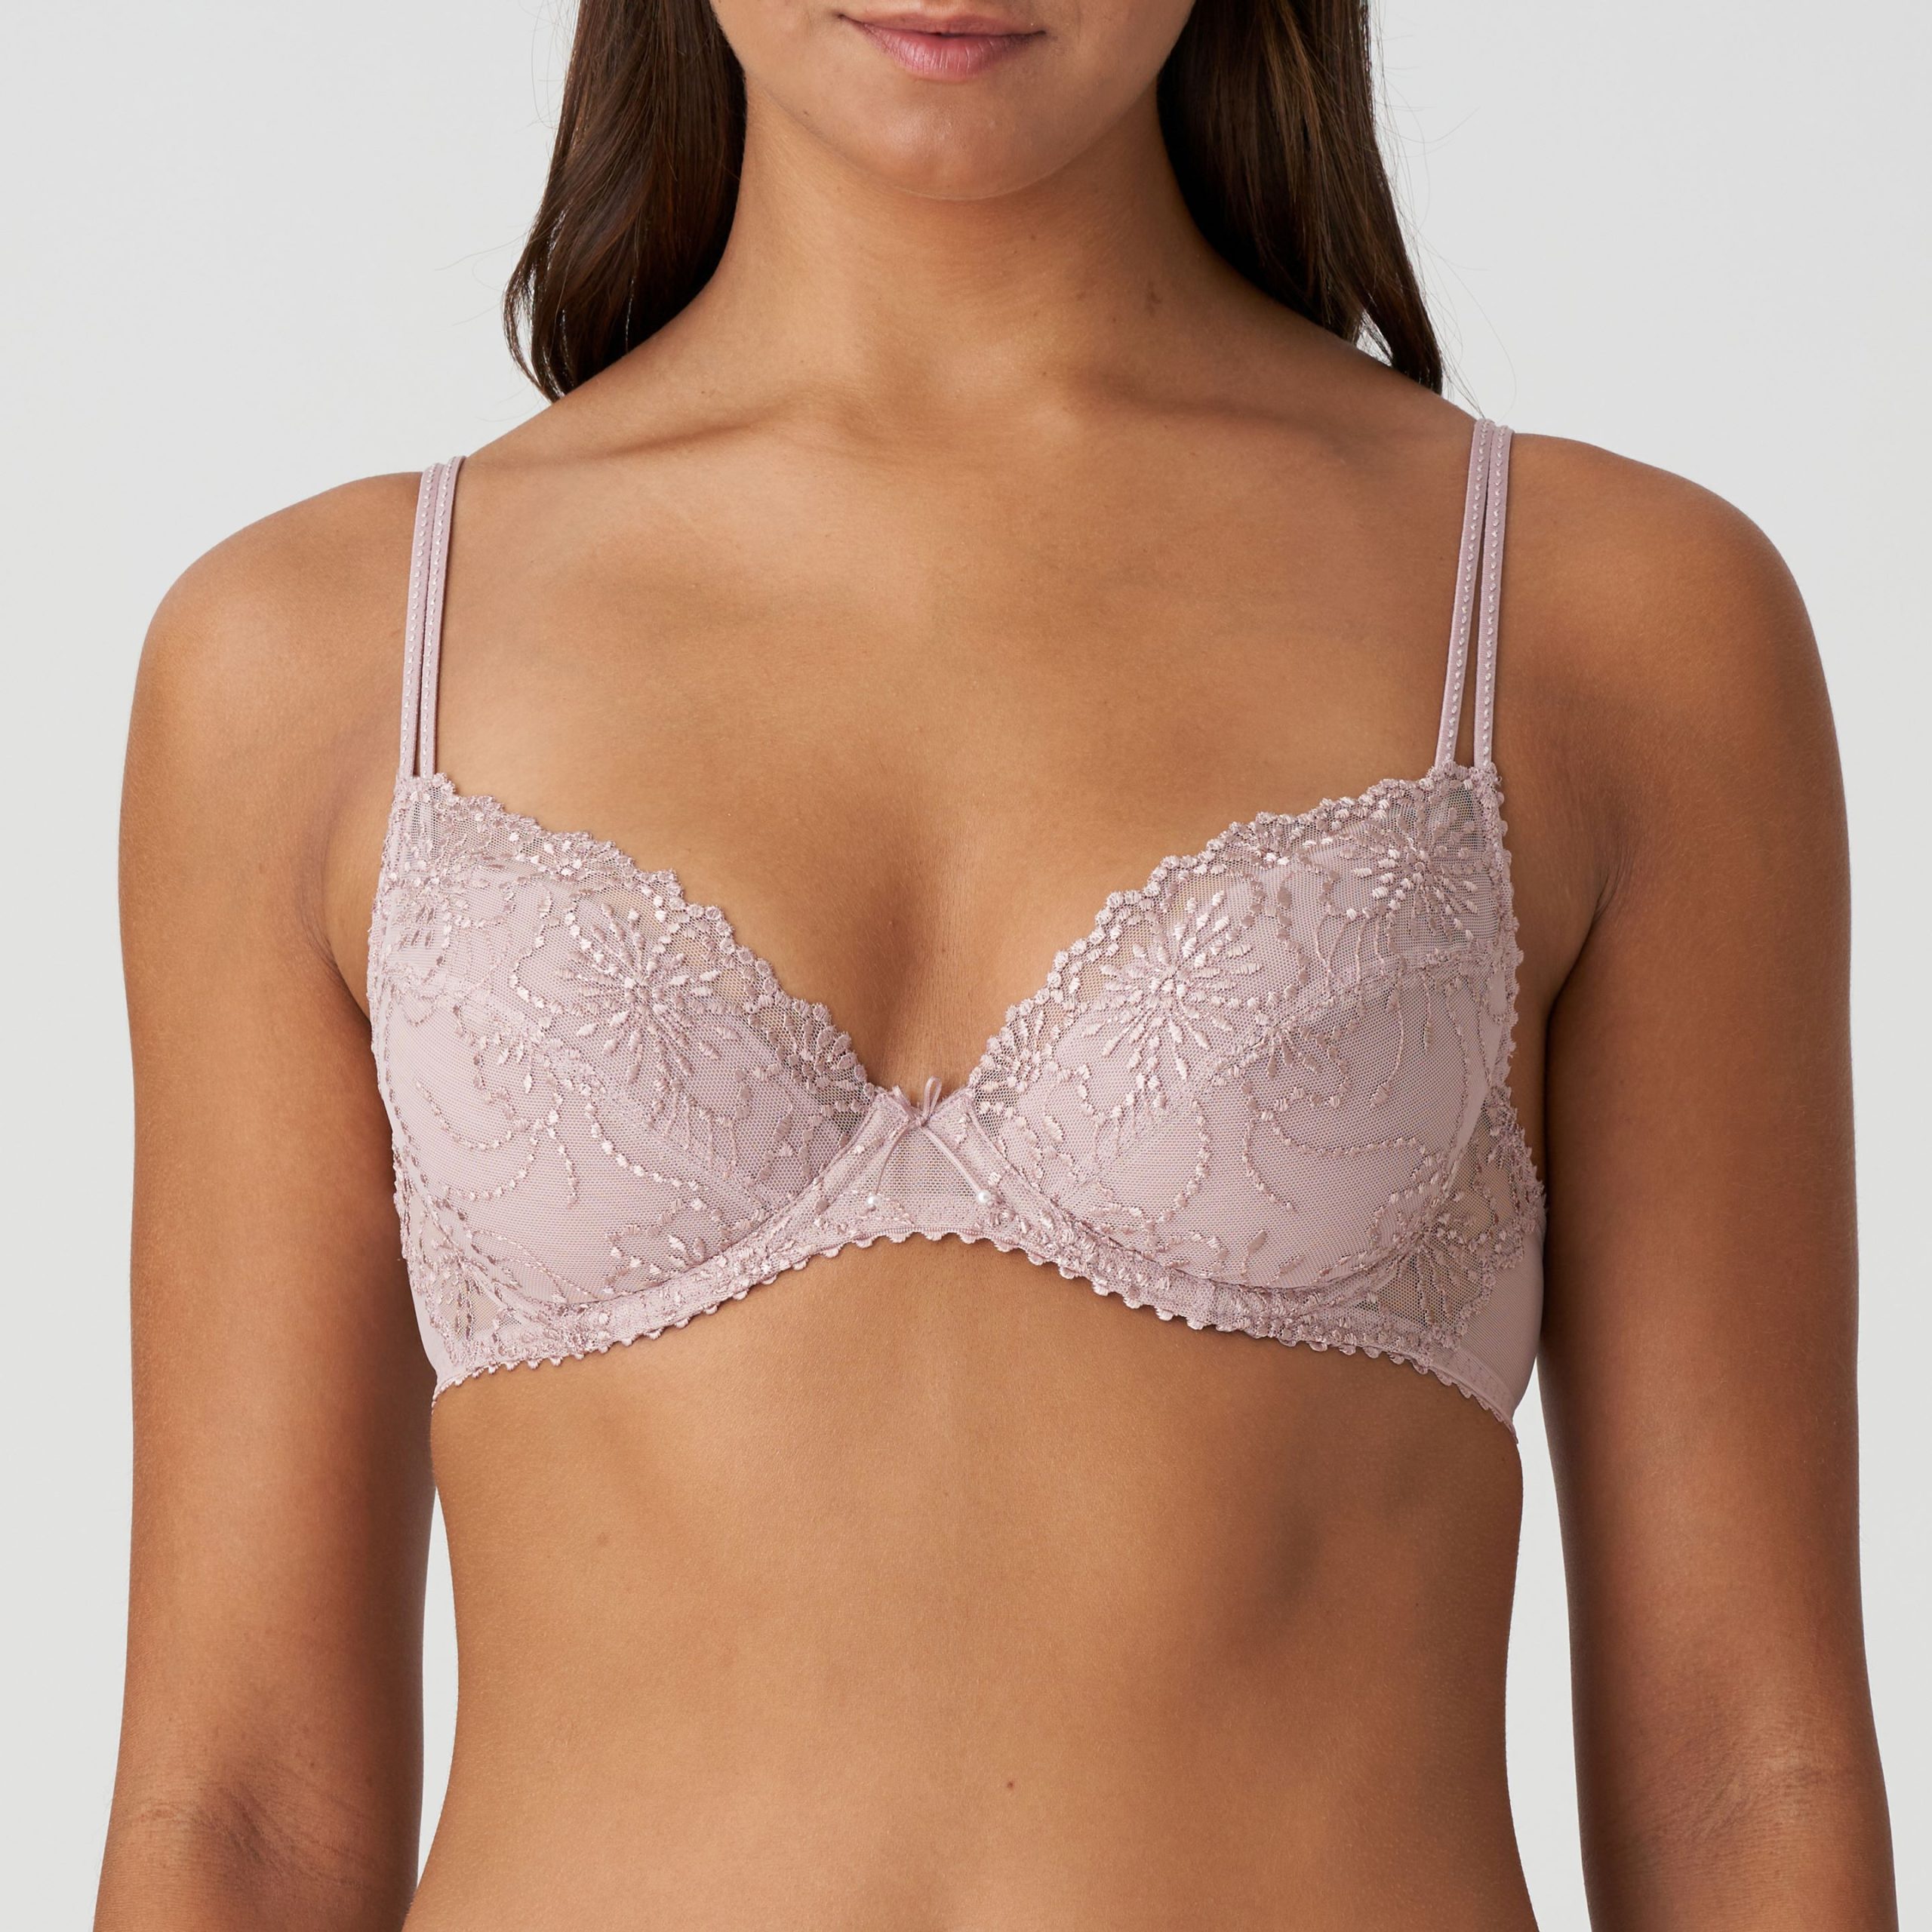 Belk - Book your appointment now! Wacoal will donate $2 to Susan G. Komen®  for every FREE bra fitting and another $2 for each Wacoal bra, shapewear  piece or b.tempt'd bra you